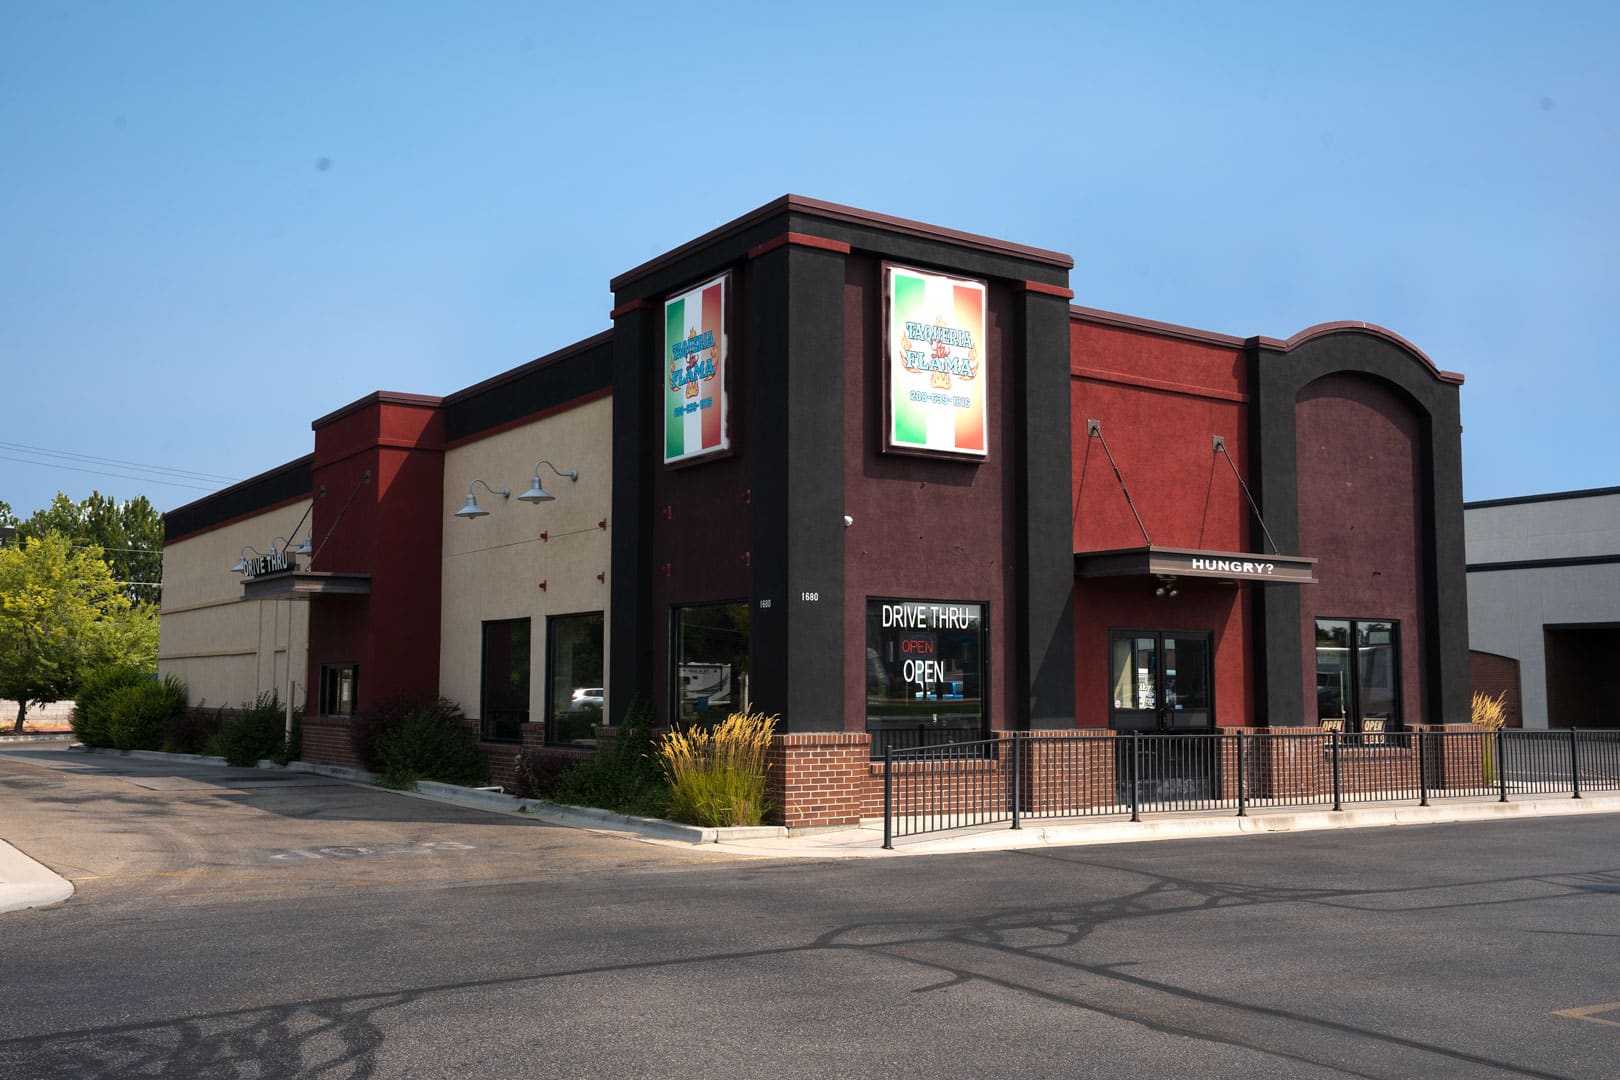 1680 Westland is a Single-tenant net-leased drive through property in Boise, Idaho